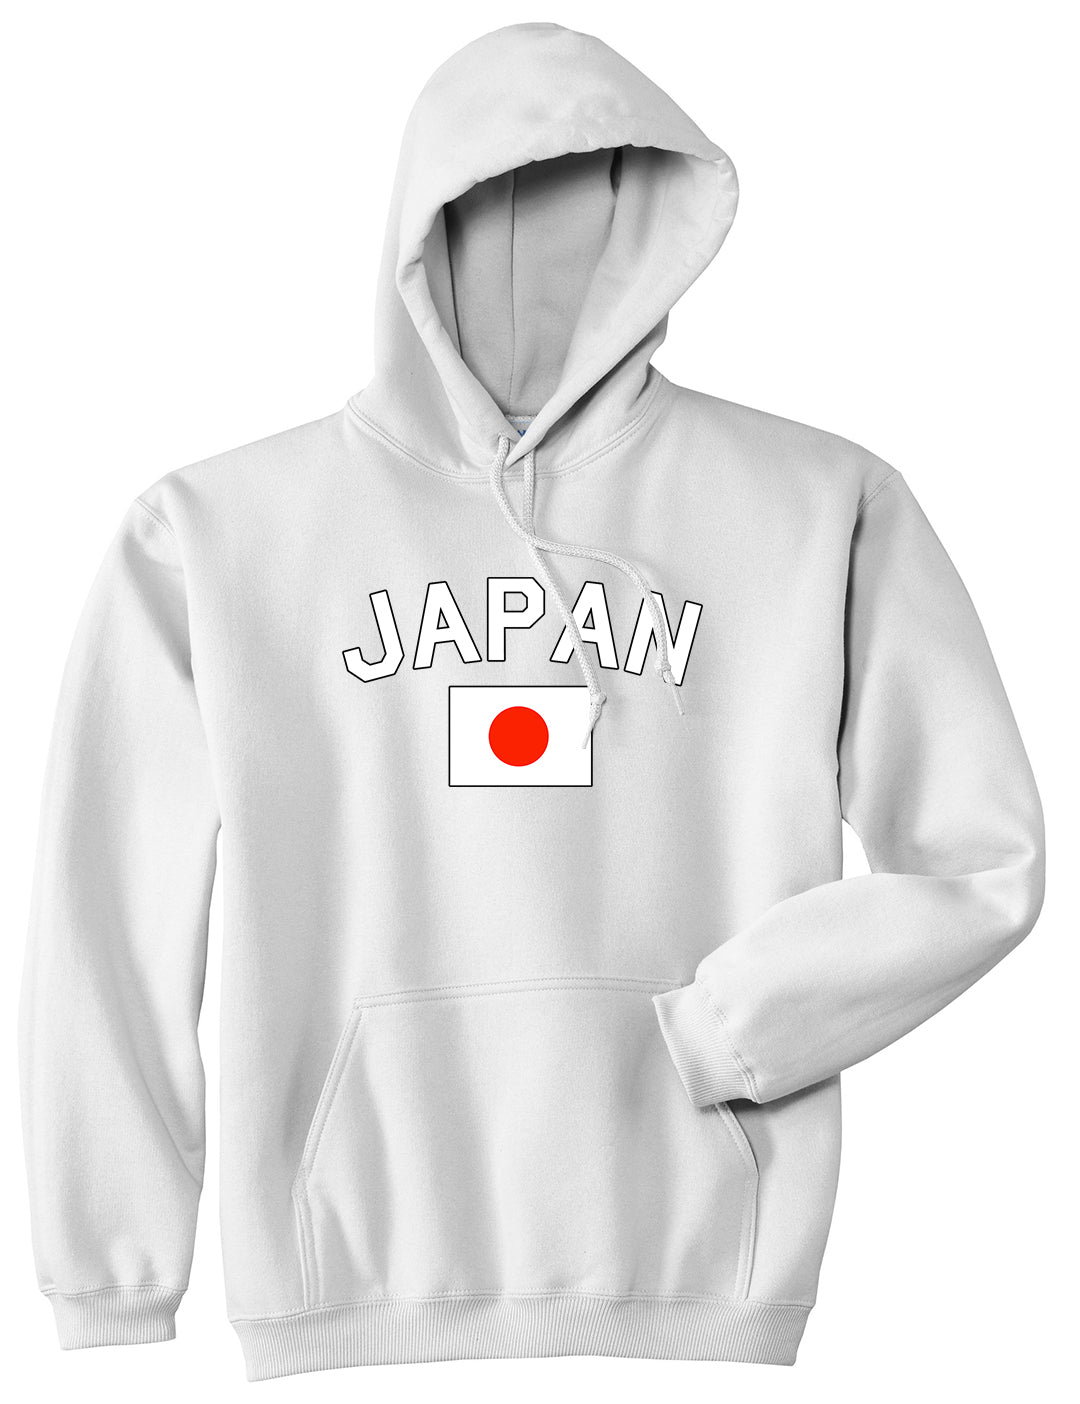 Japan With Japanese Flag Mens Pullover Hoodie White